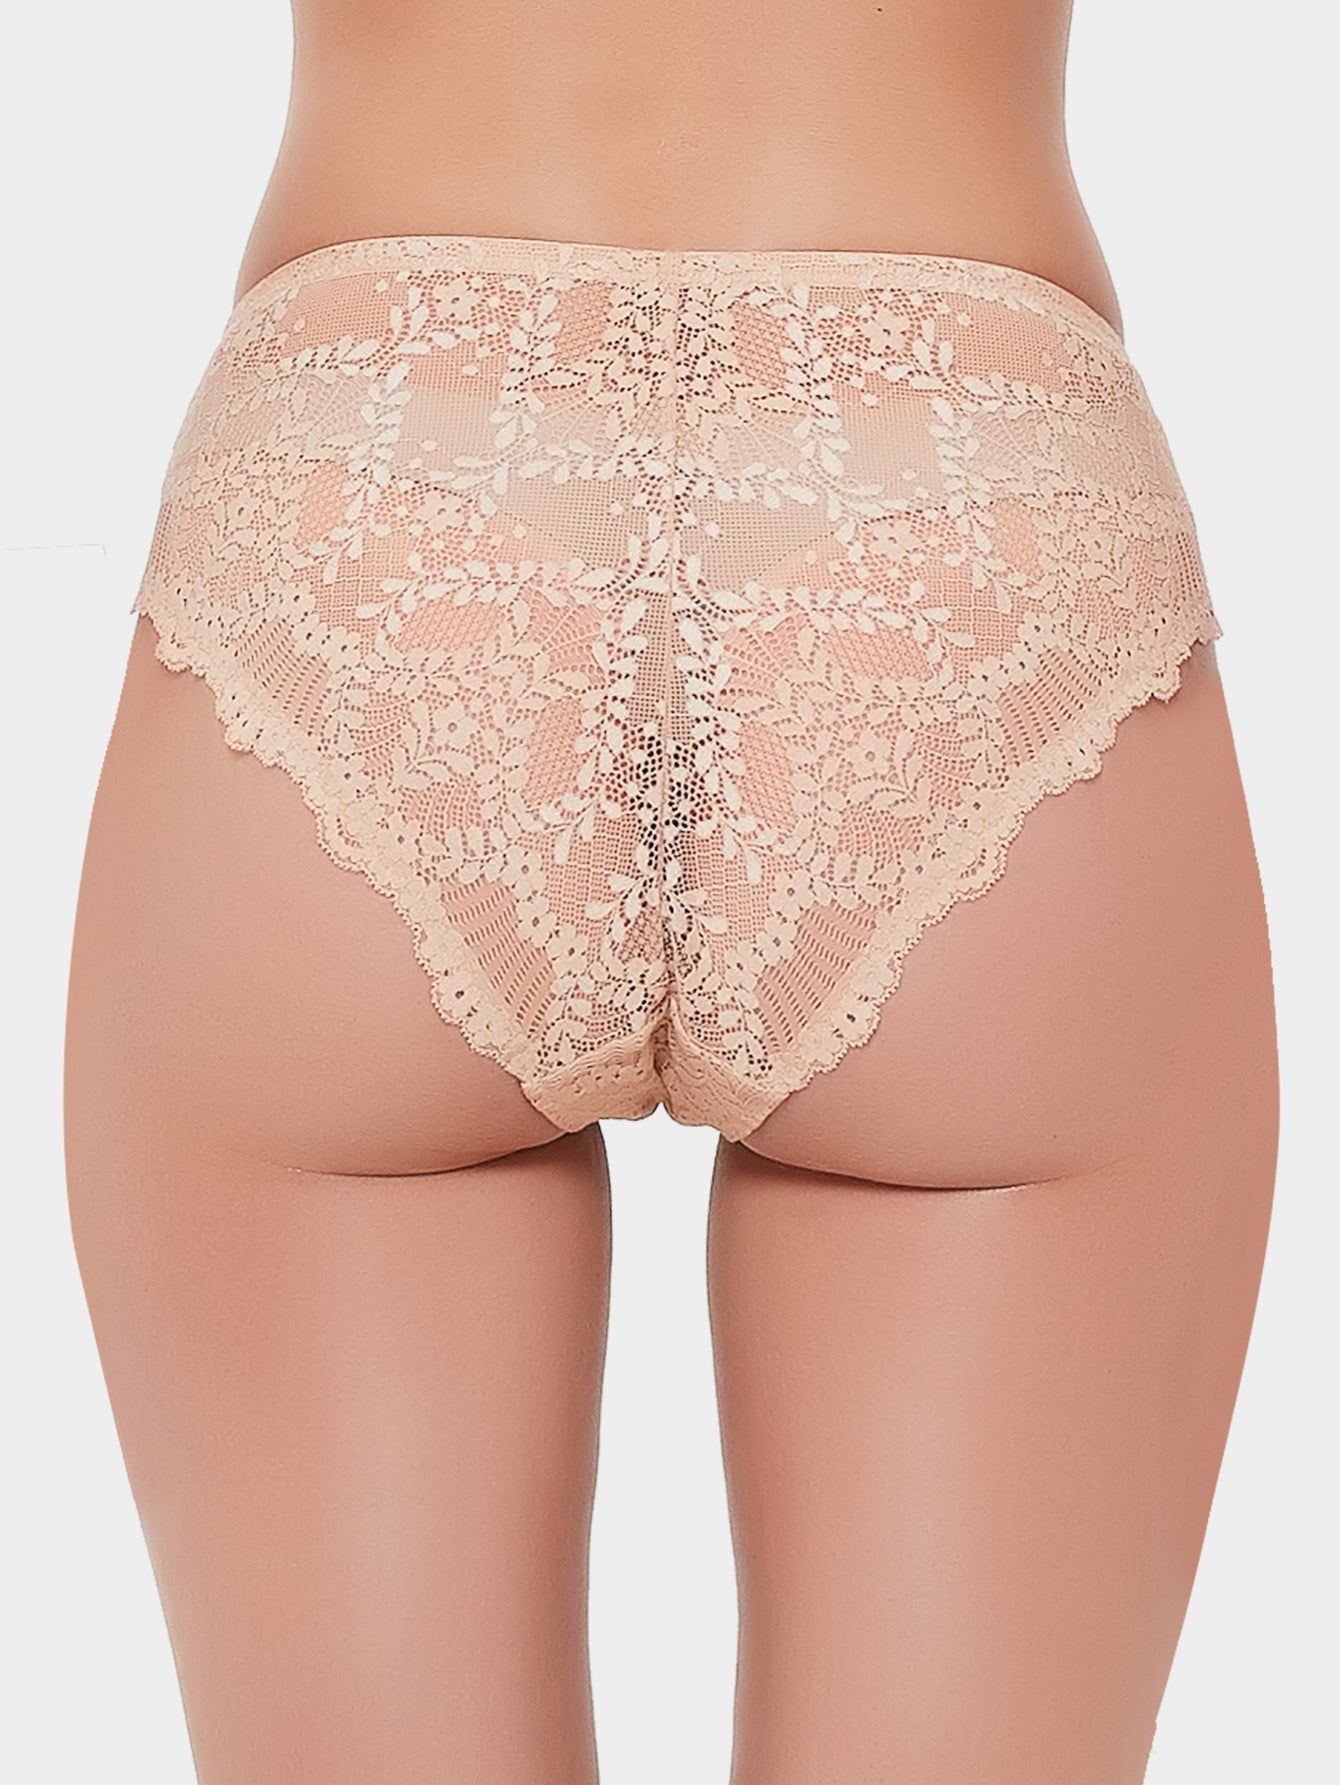 4 PCS Lace Panties Sexy High Cut Briefs Hipster Underwear Nude